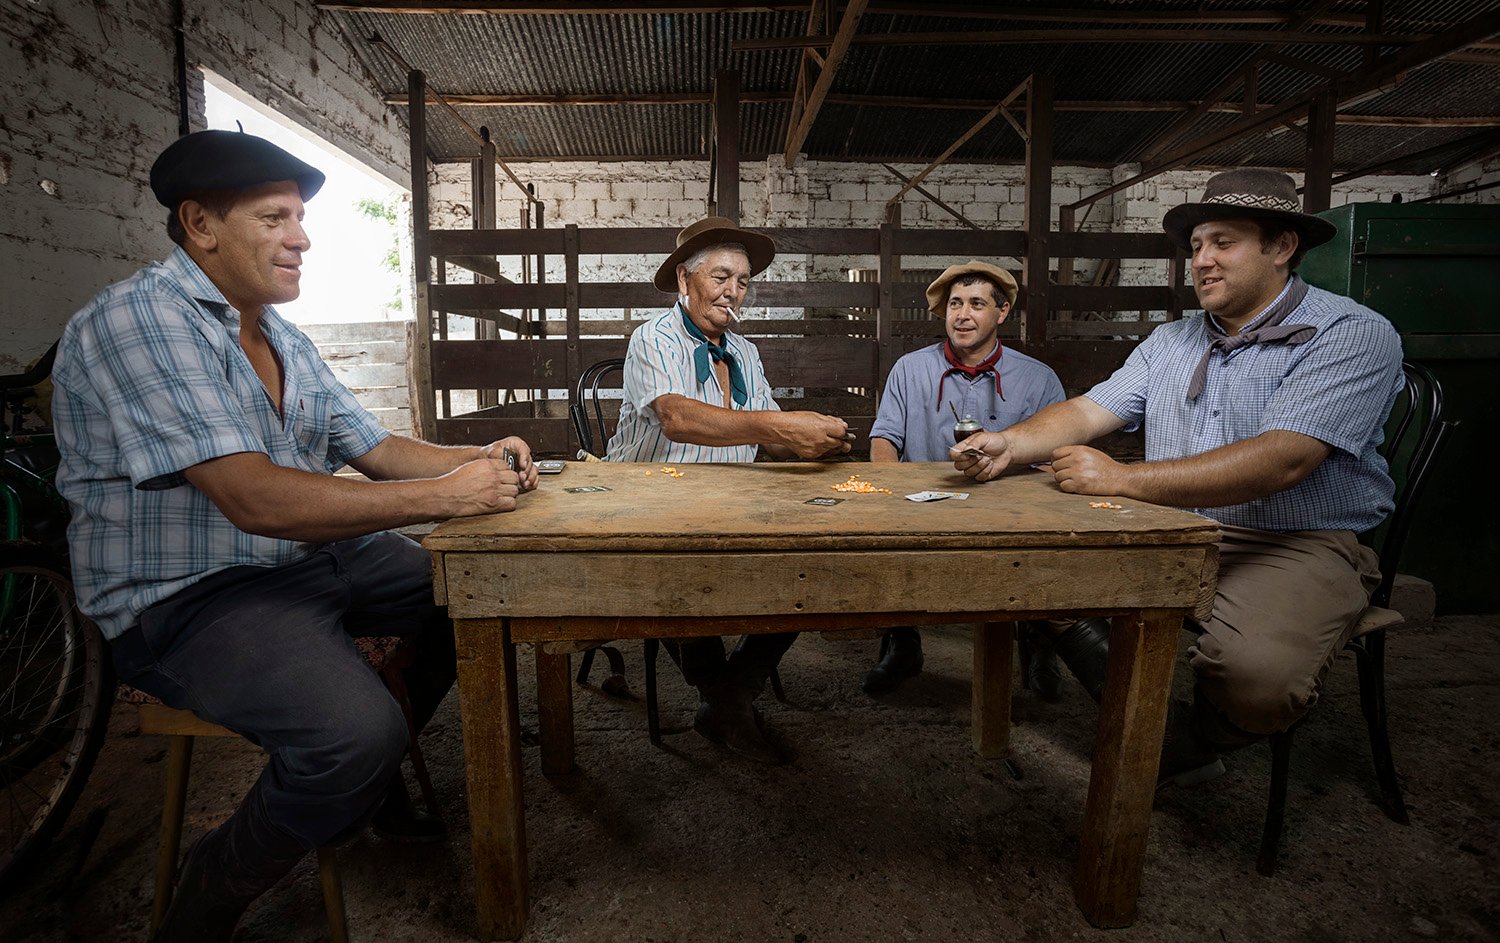 Jorge Oviedo's photo of four gauchos at a rustic wooden table in a stable playing cards.